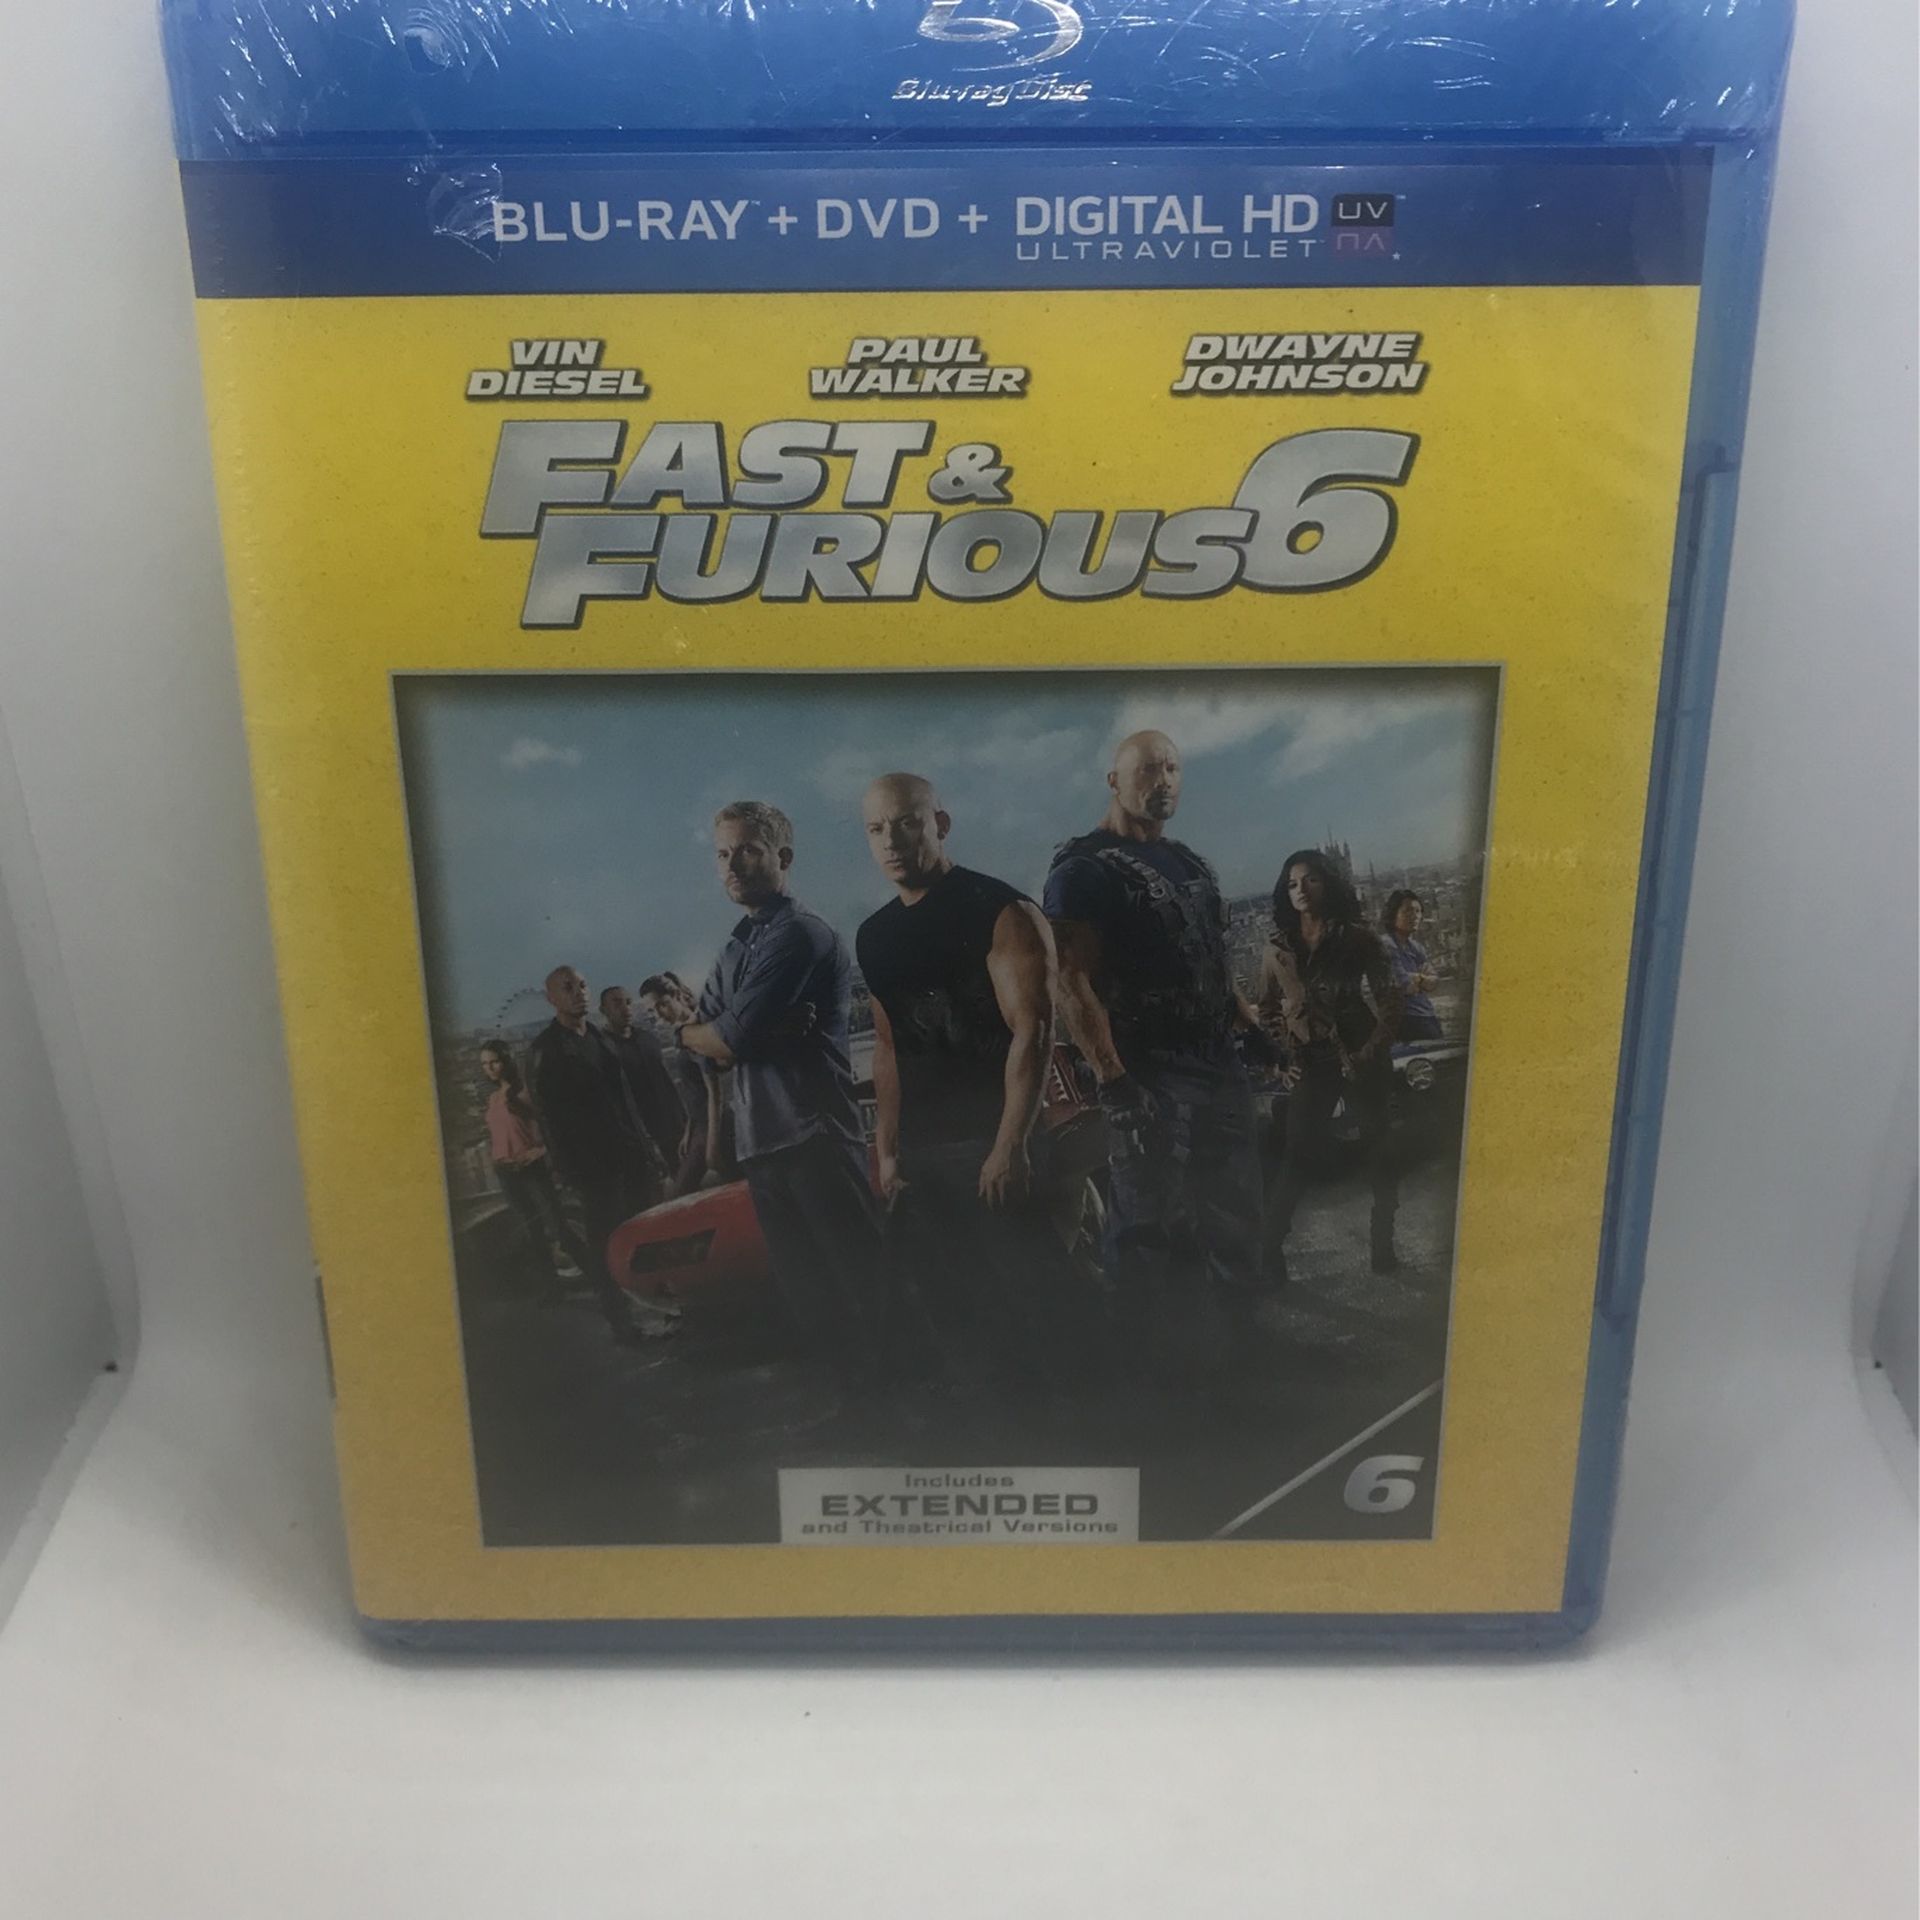 The Fast And Furious 6 Blu-ray DVD Digital Copy Brand New